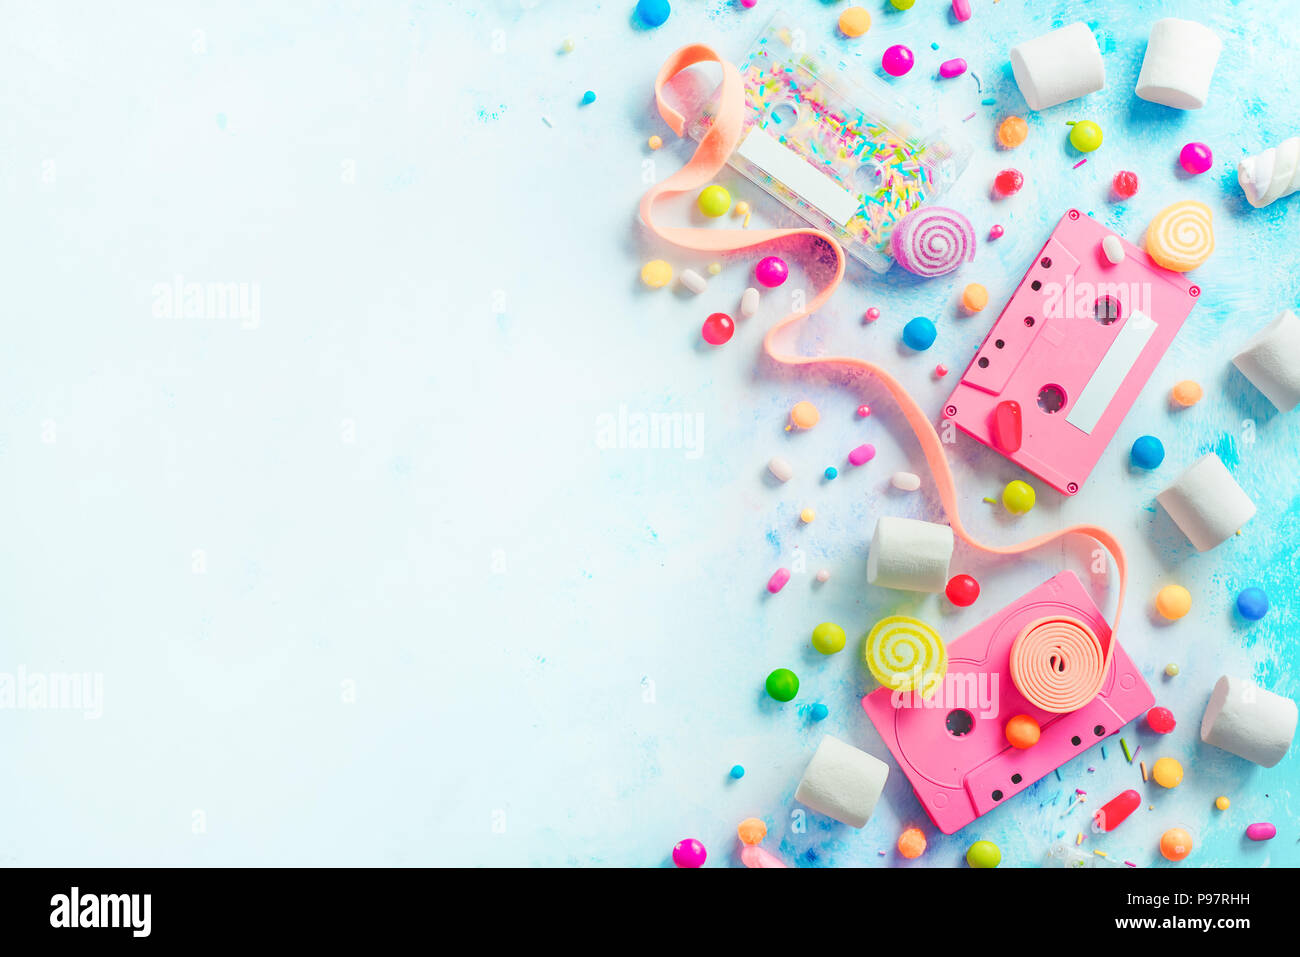 Pink cassette tapes in a sweet sounds concept. Candies, sprinkles and marmalades on a light background with copy space. Pastel color flat lay header Stock Photo